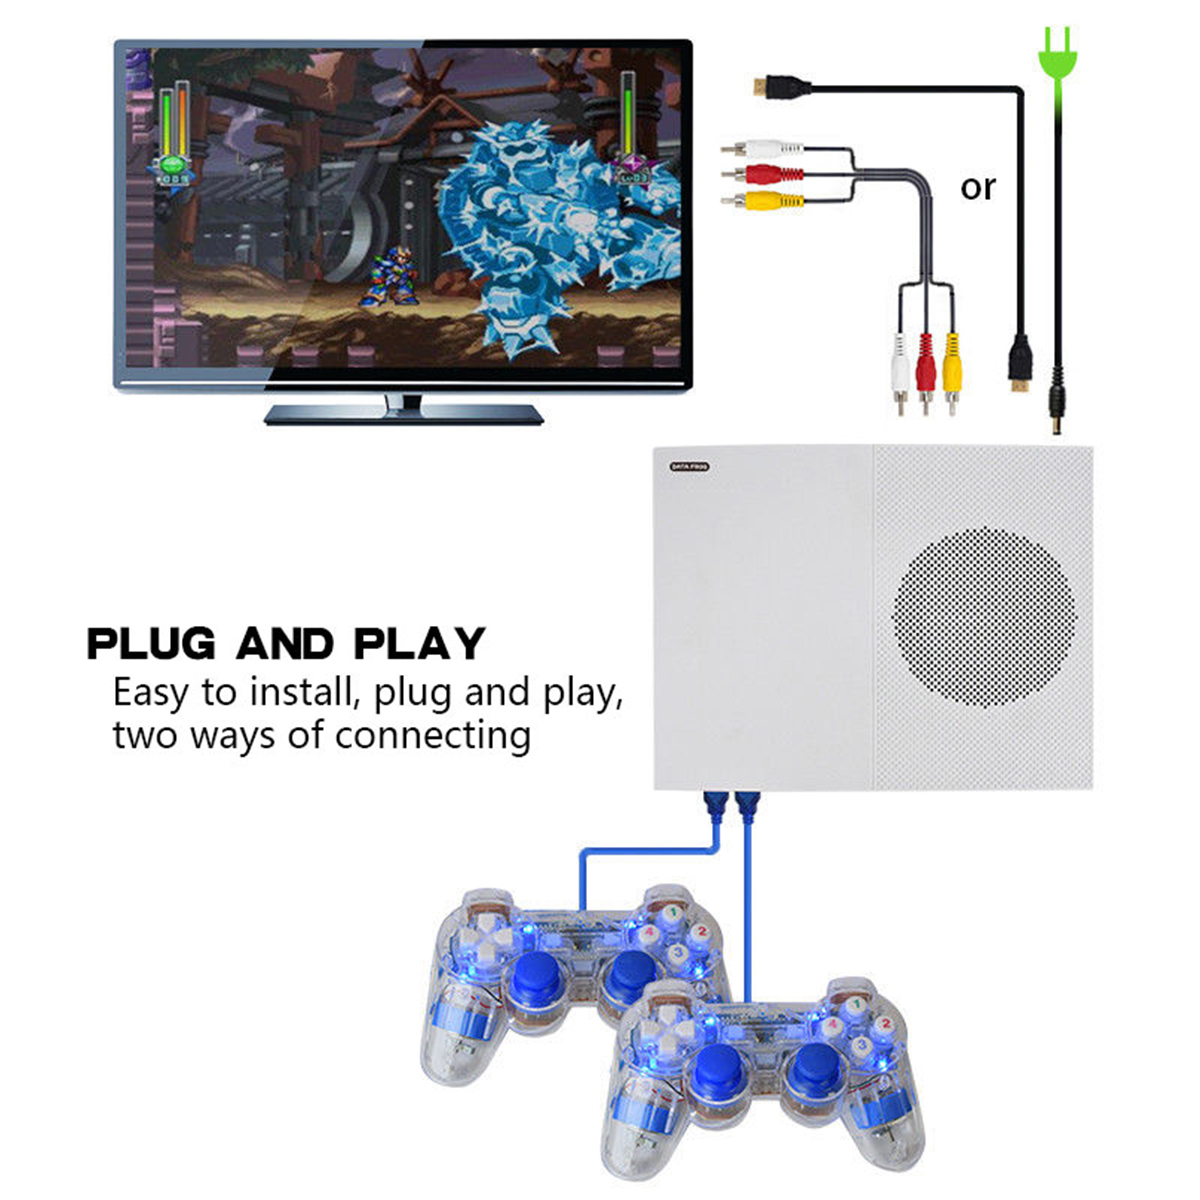 Classic-Game-Console-Built-in-600-Games-TV-Movie-HD-Output-Video-with-2-Joysticks-1210920